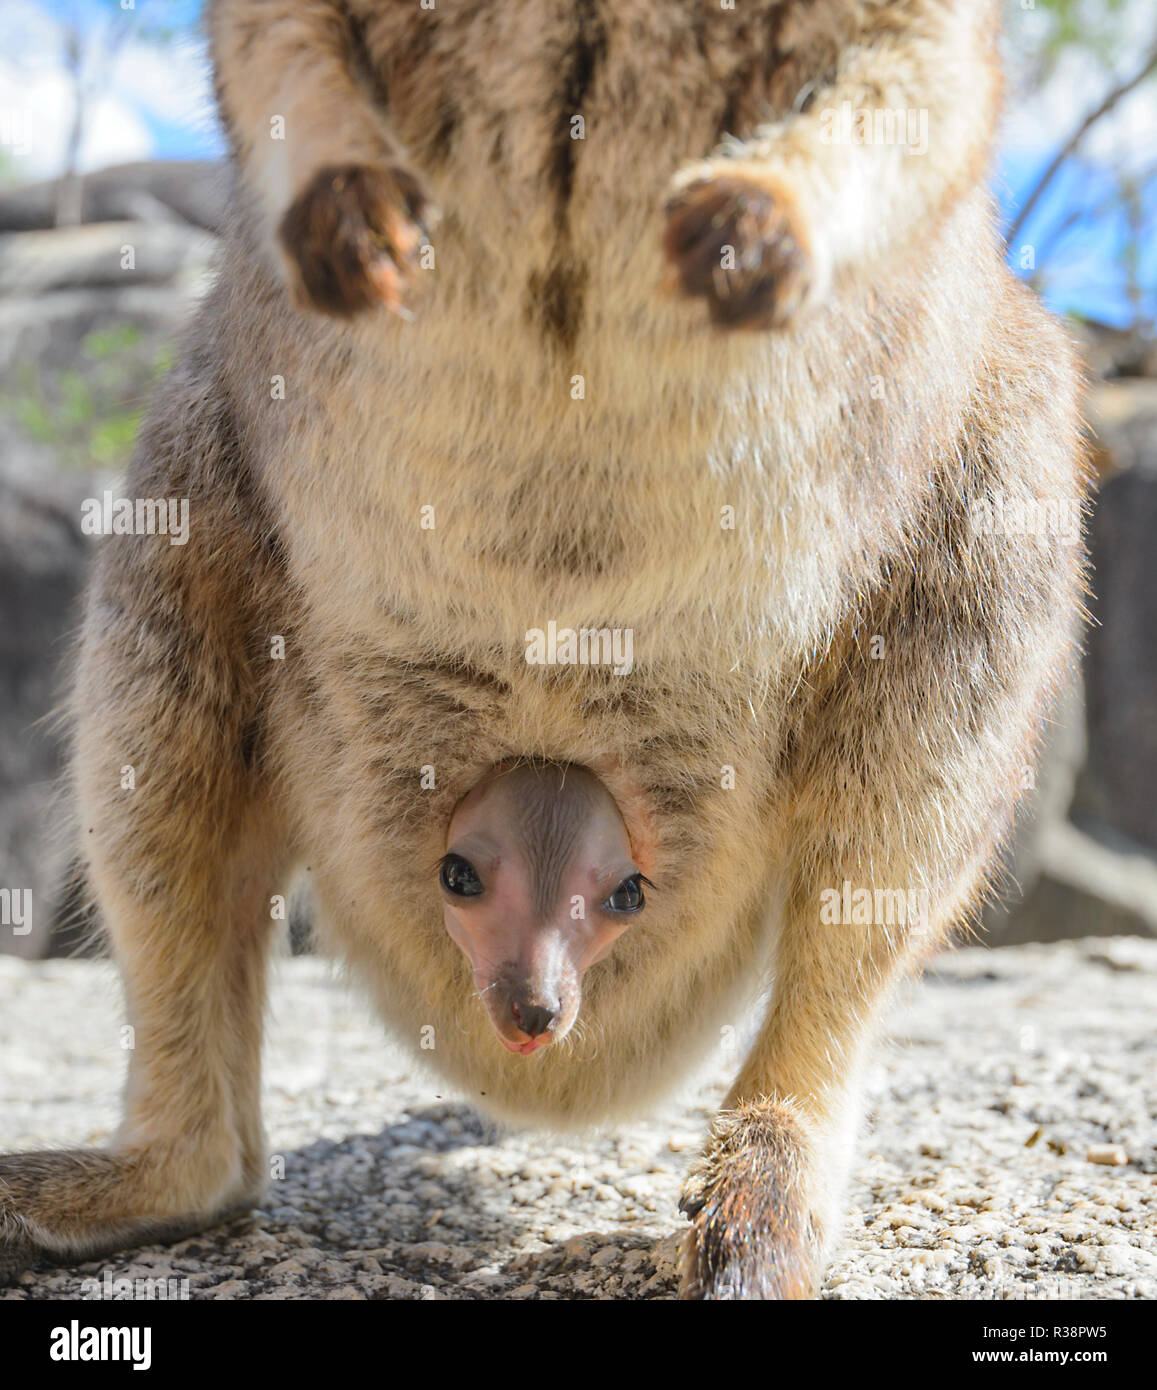 Endangered Mareeba Unadorned Rock Wallaby with joey in her pouch (Petrogale inornata, Mareeba race), Granite Gorge Nature Park, Atherton Tablelands, Stock Photo